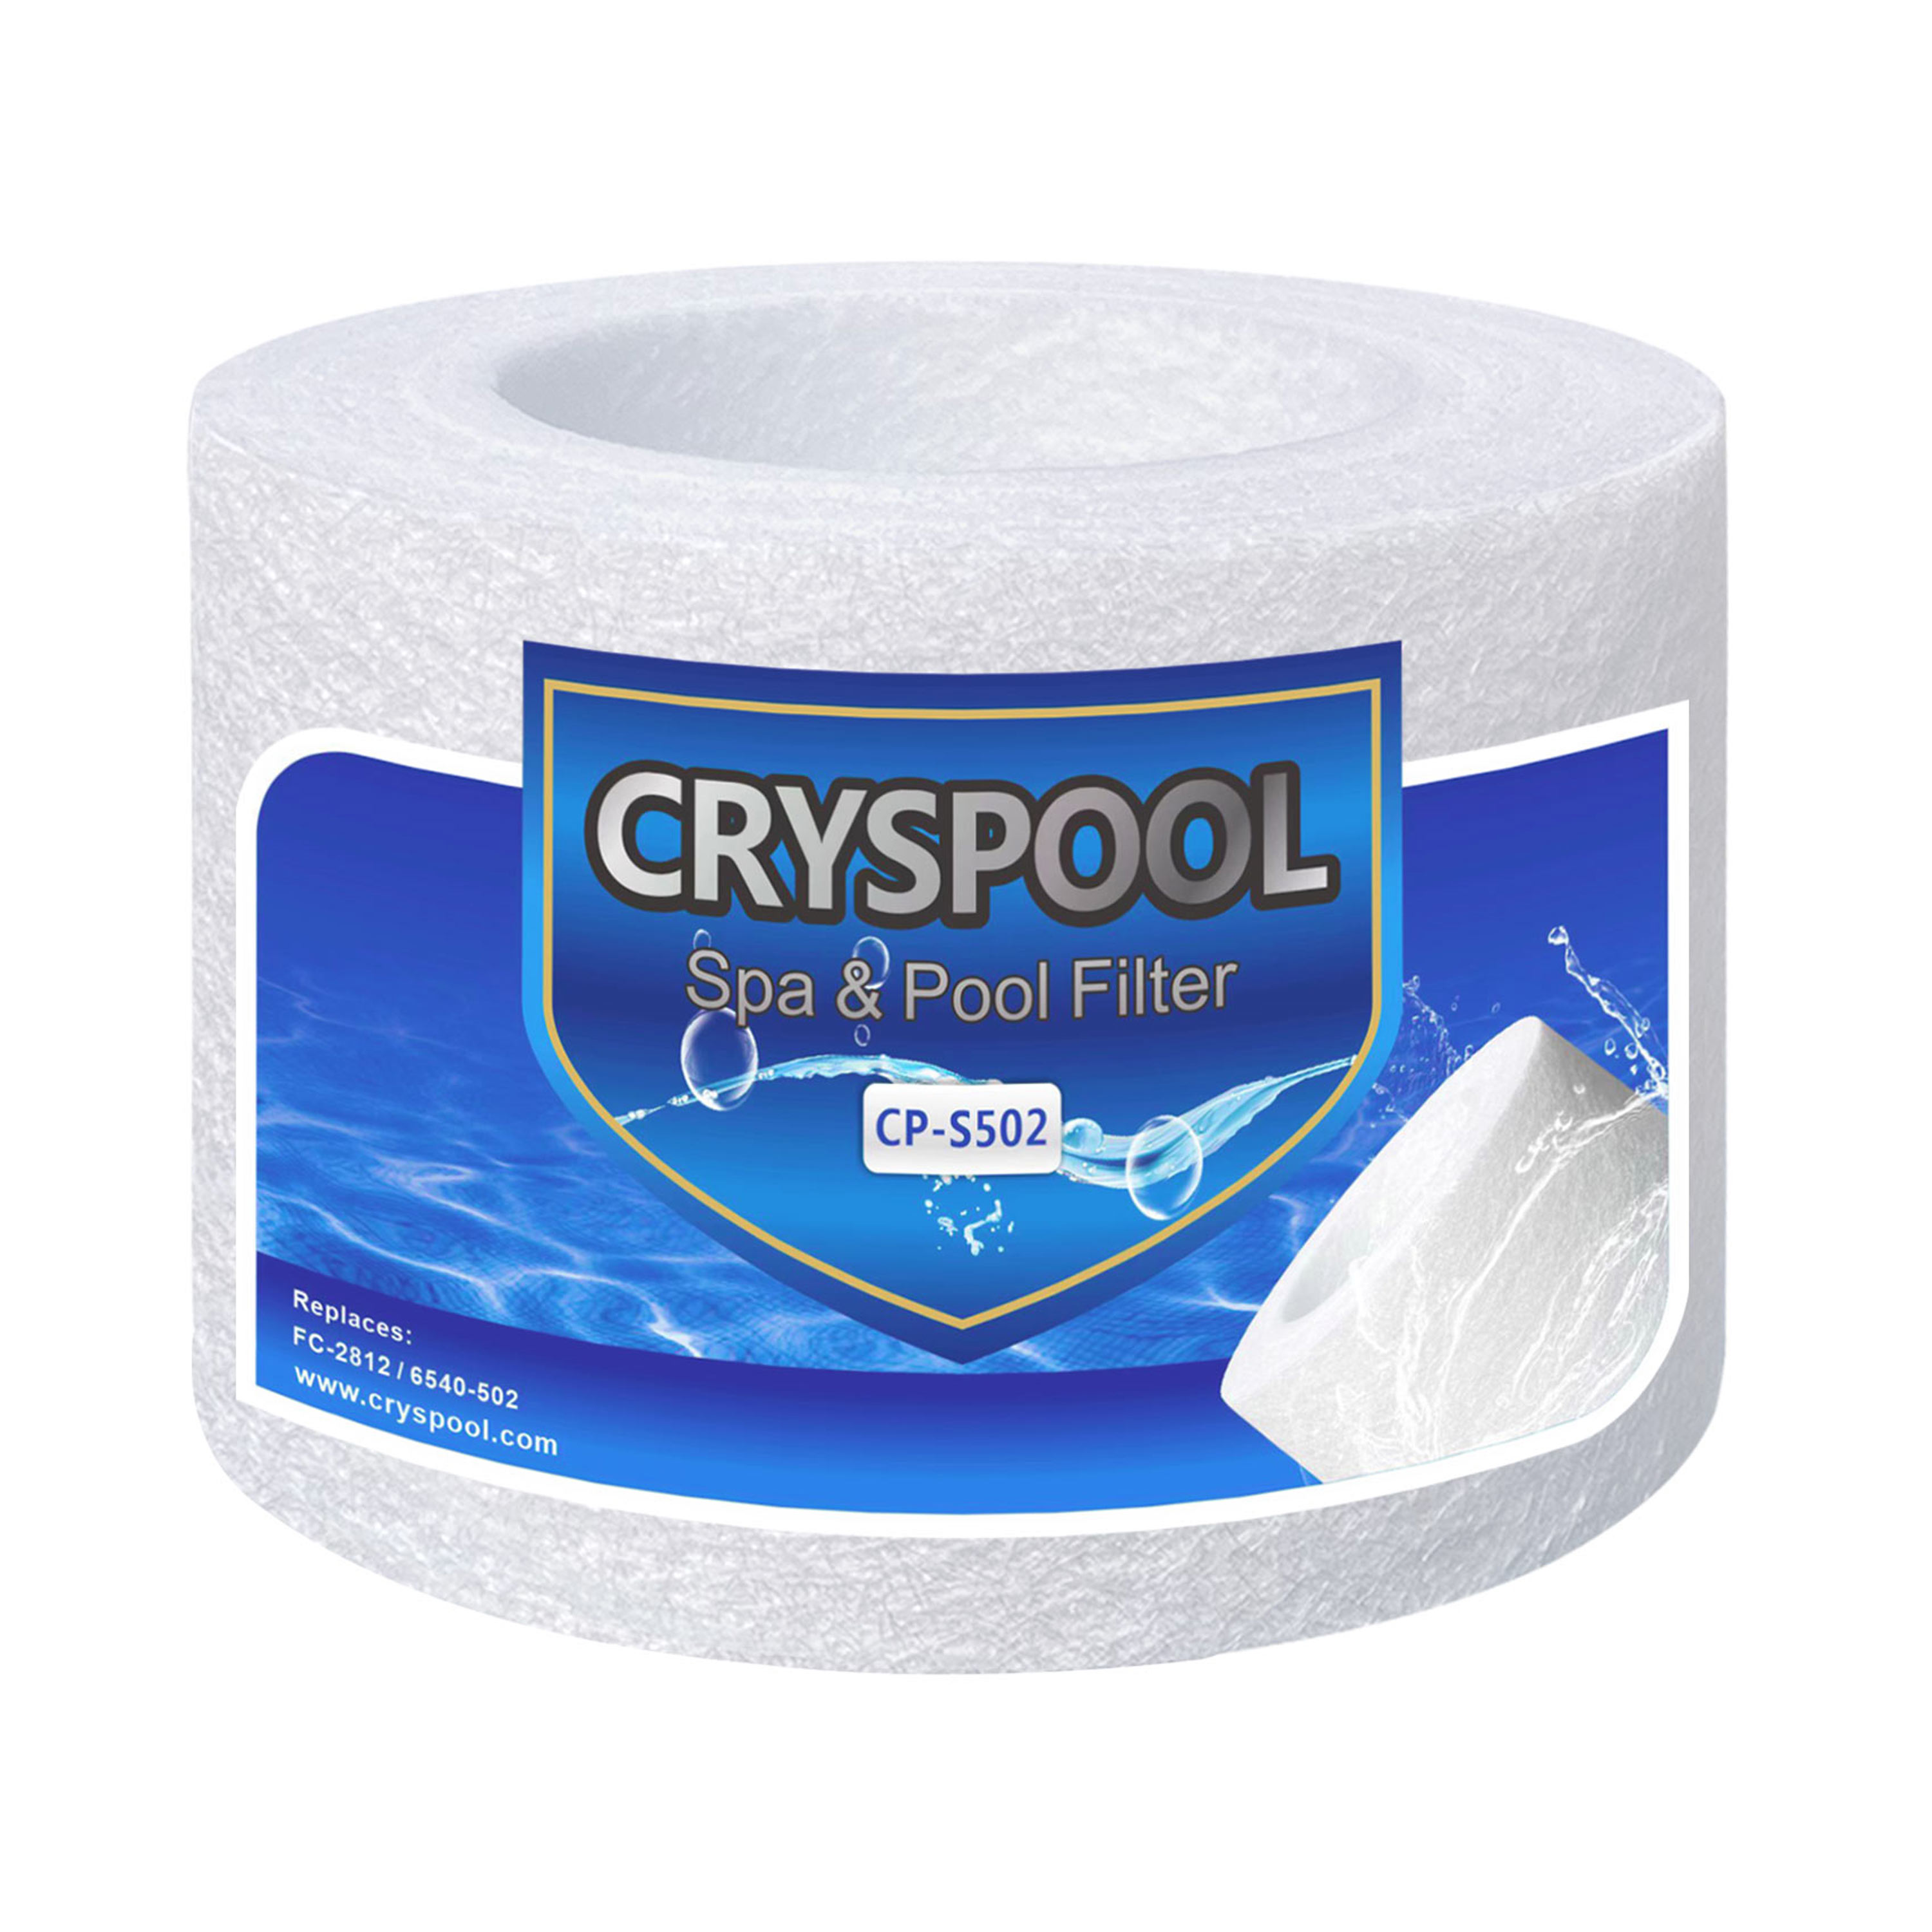 Cryspool Spa Filter Compatible with FC-2812, Sundance 6540-502, Throwaway Absorbtion Filter